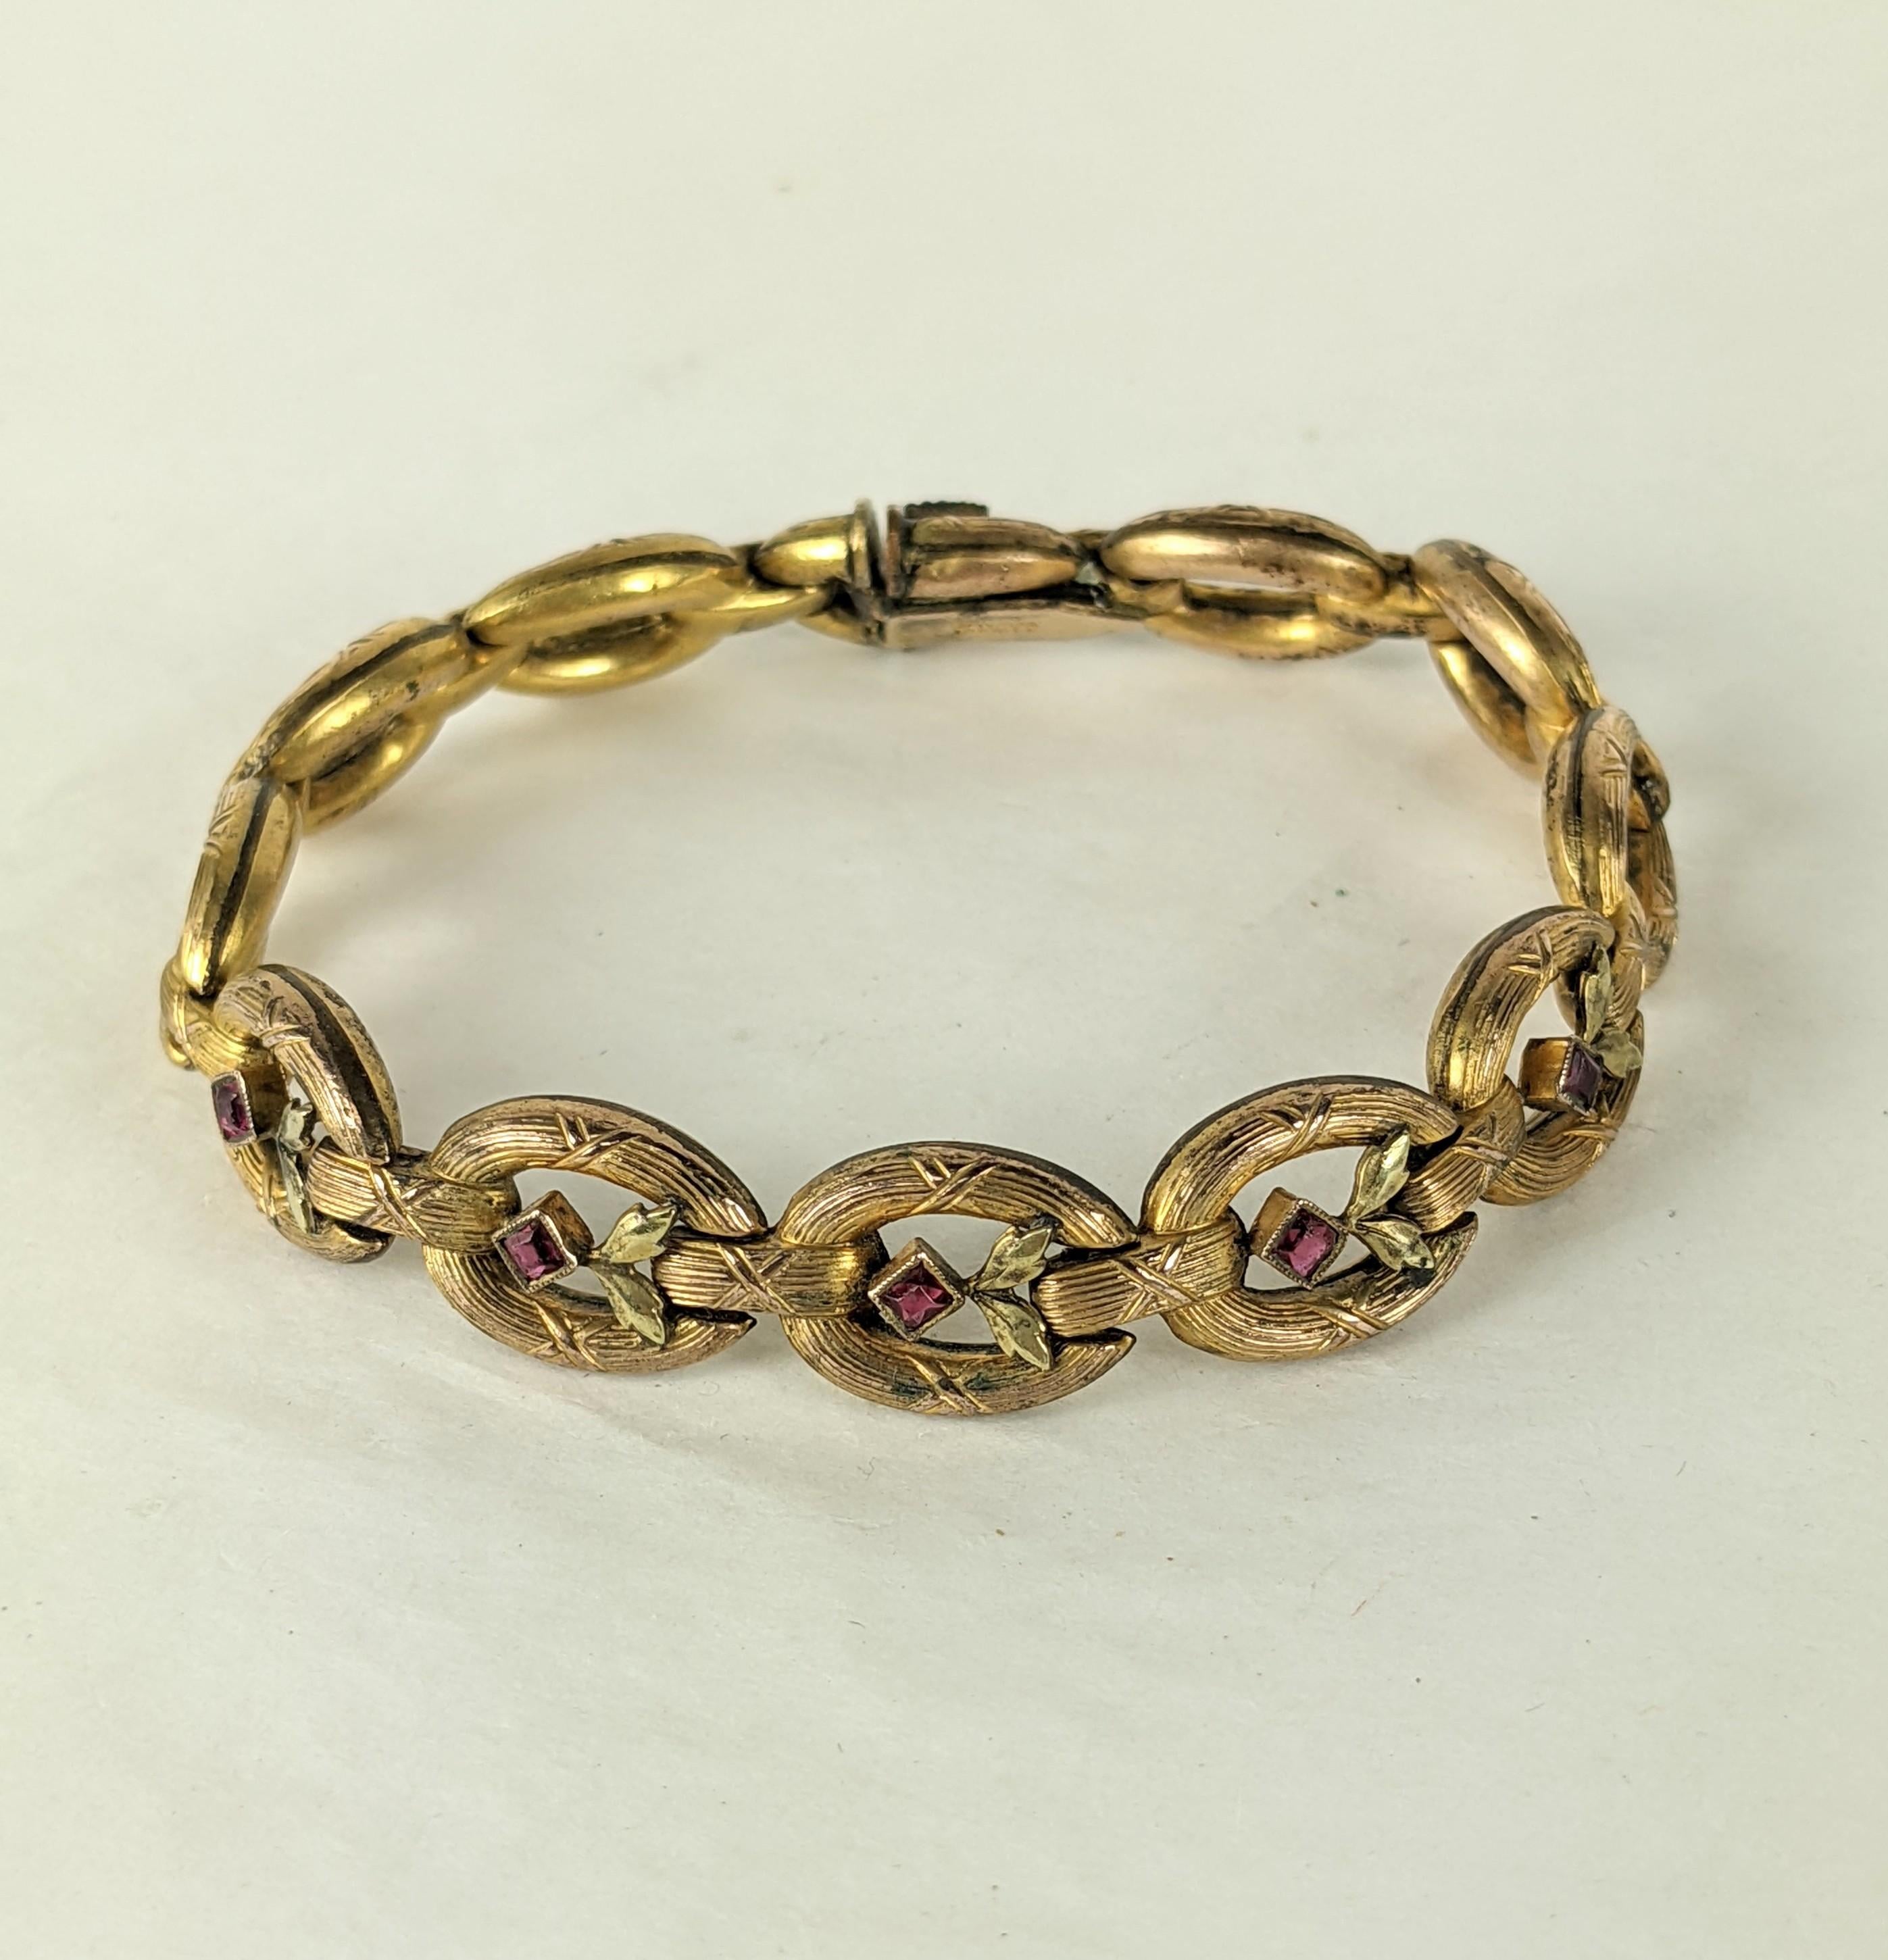 Elegant Edwardian French Gold Filled Link Bracelet circa 1910. Gold toned link with central links decorated with green gold leaves and ruby pastes.  
7